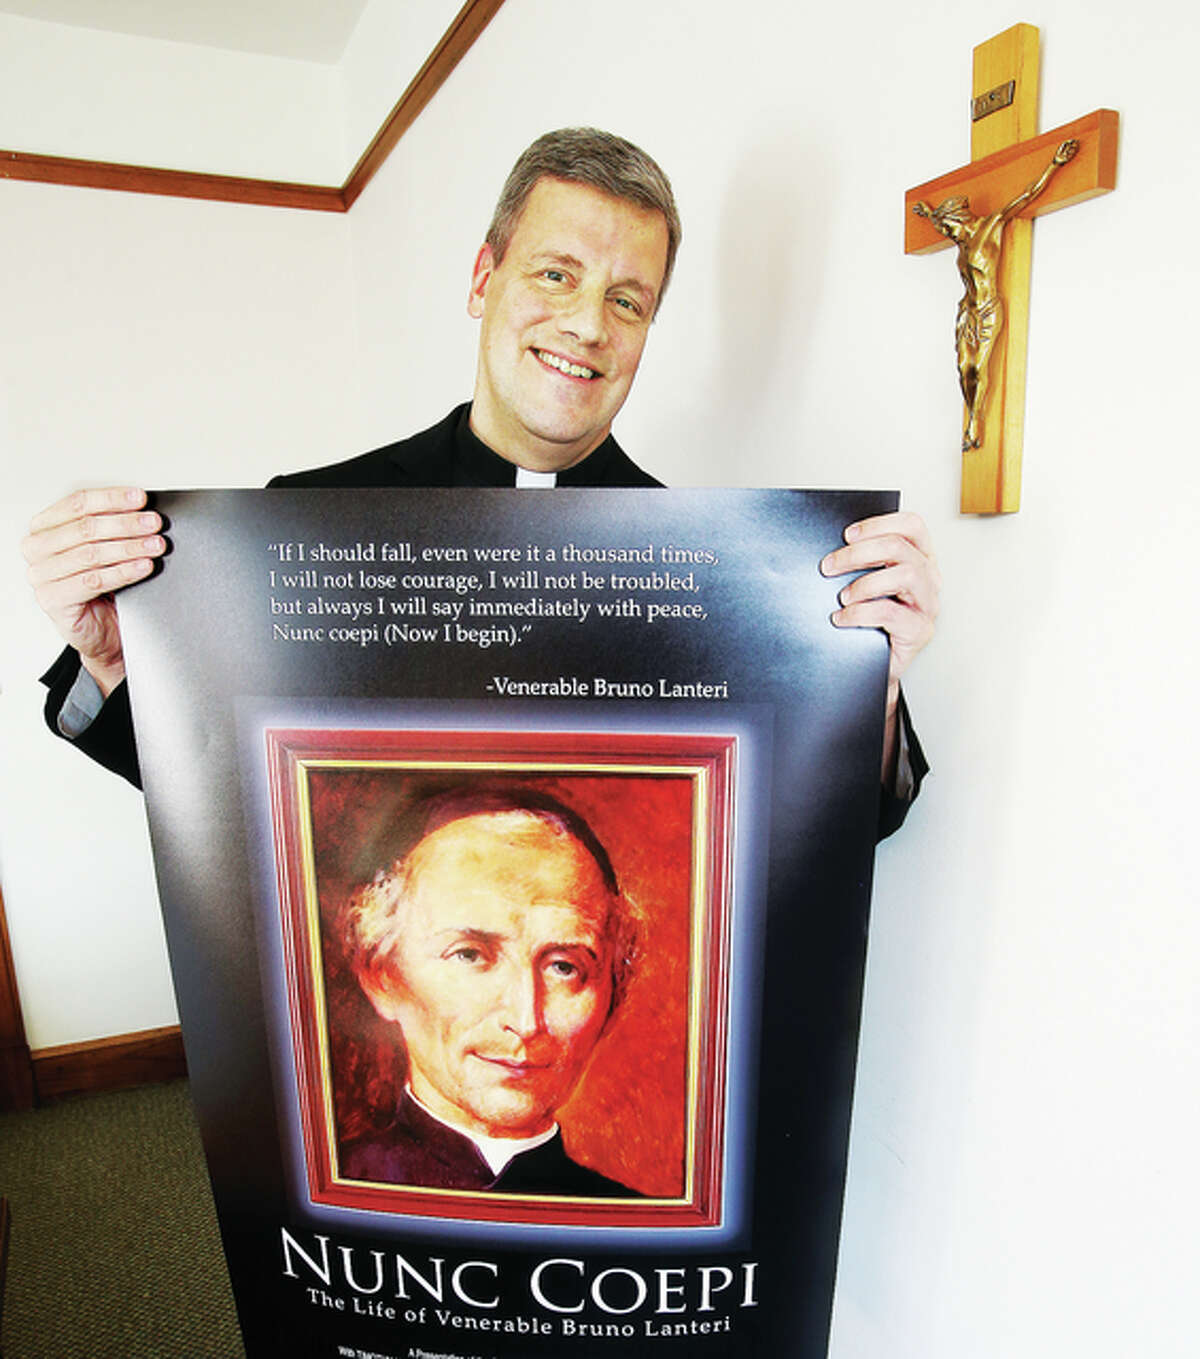 Fr. John Wykes, from St. Mary’s Catholic Church in Alton, holds a promotional poster for the film he co-produced and directed on Bruno Lanteri, the founder of his order, Oblates of the Virgin Mary. The film will be previewed in Italy, Boston and Alton.